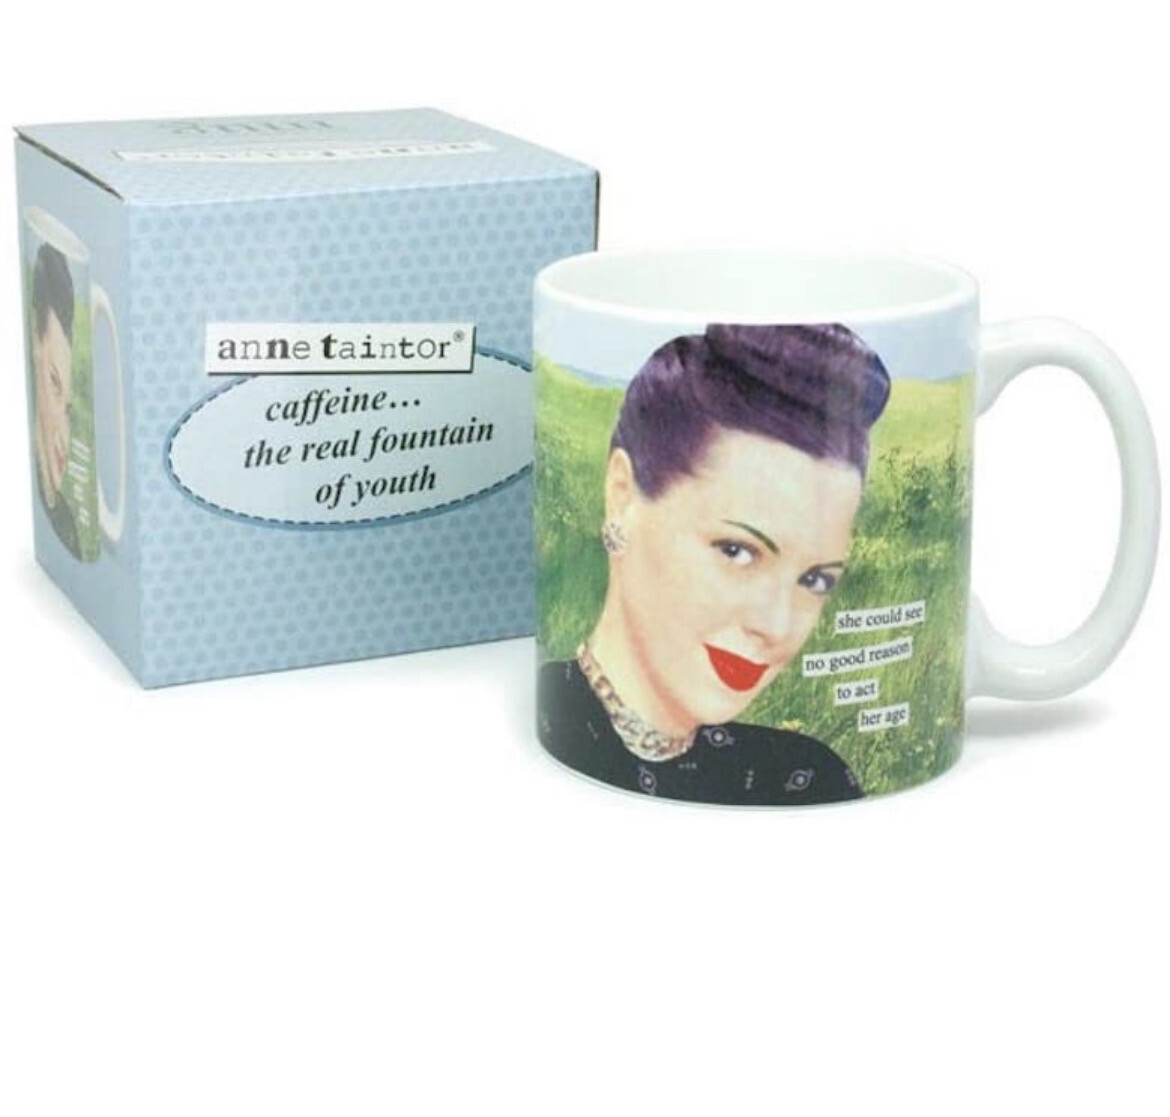 She Could See No Reason To Act Her Age Anne Taintor Mug